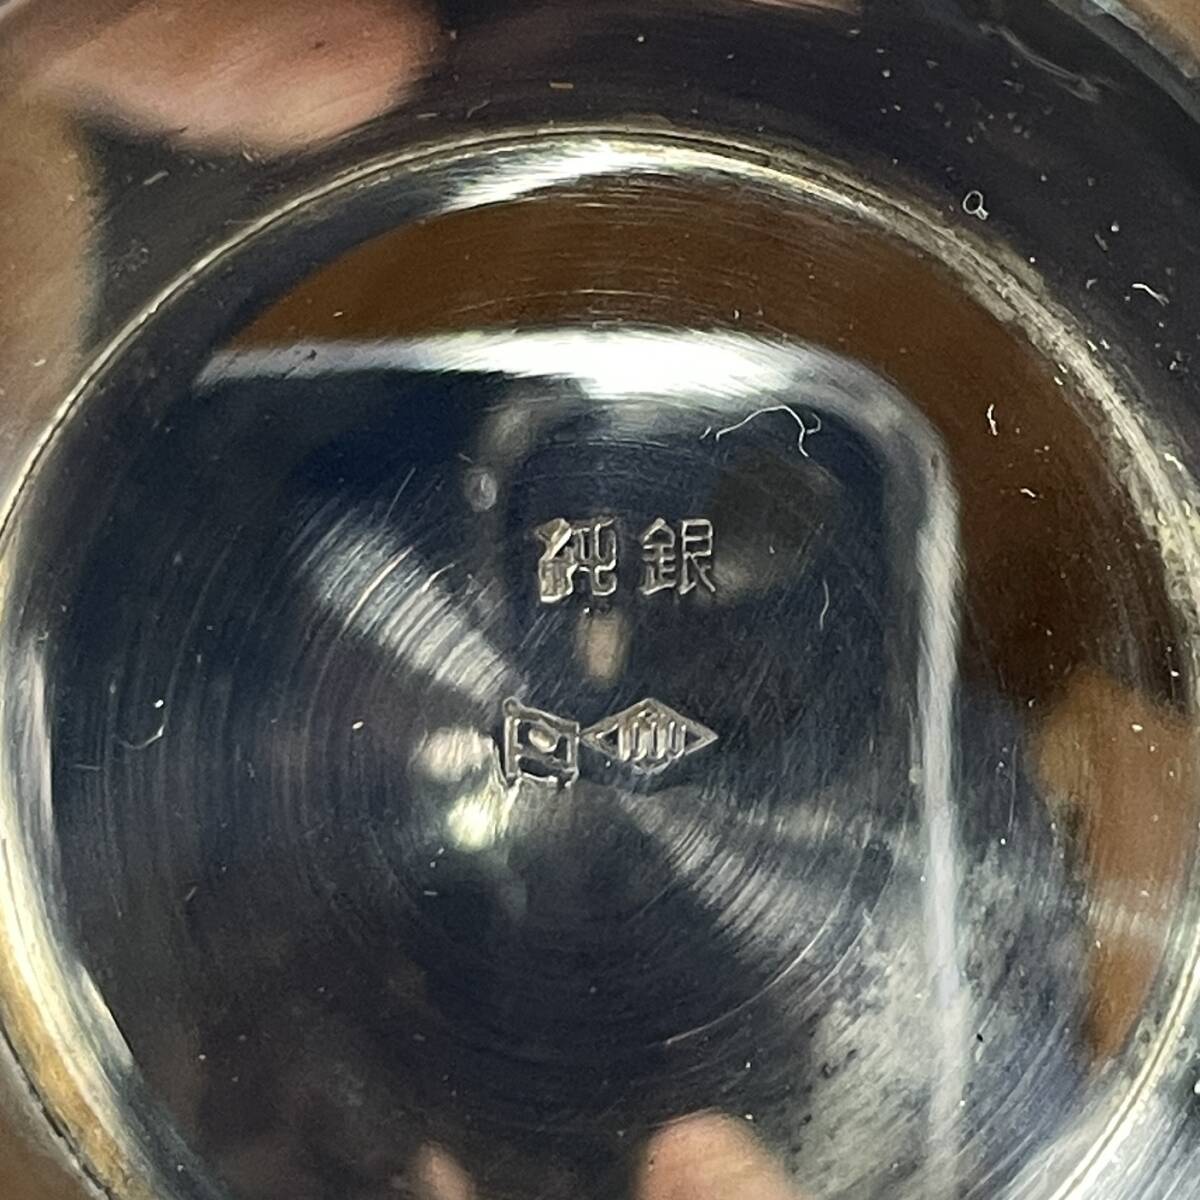 MS913 original silver . equipped silver cup gross weight : approximately 95.3g case attaching Showa era 50 year 9 month 19 day Tokyo Metropolitan area governor Mino part ..( inspection ) capital . gratitude silver SILVER sake cup and bottle 